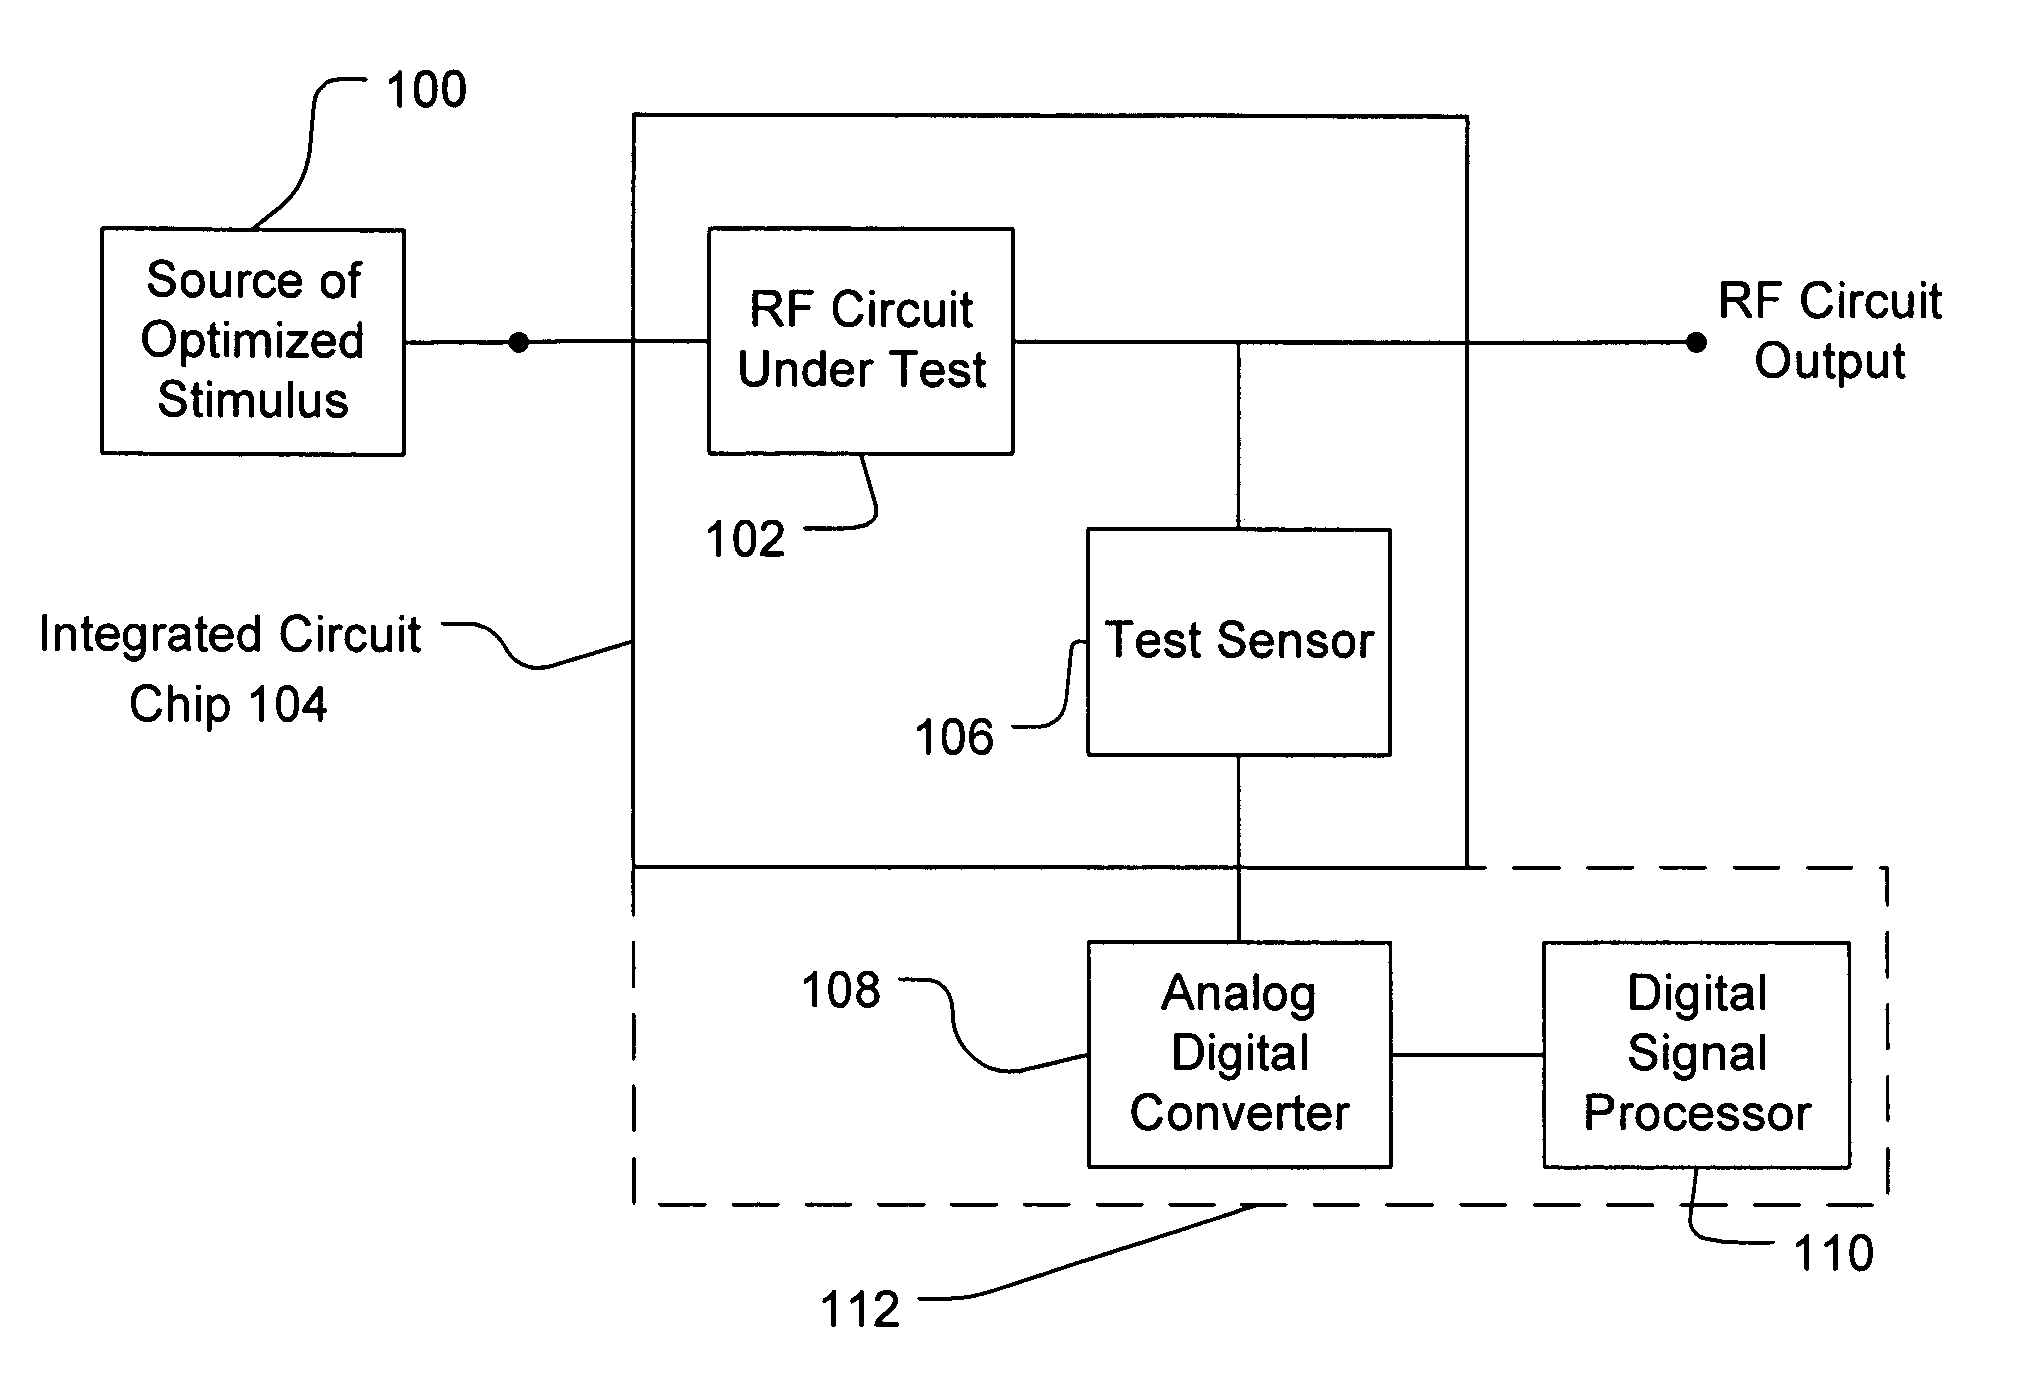 Production test technique for RF circuits using embedded test sensors